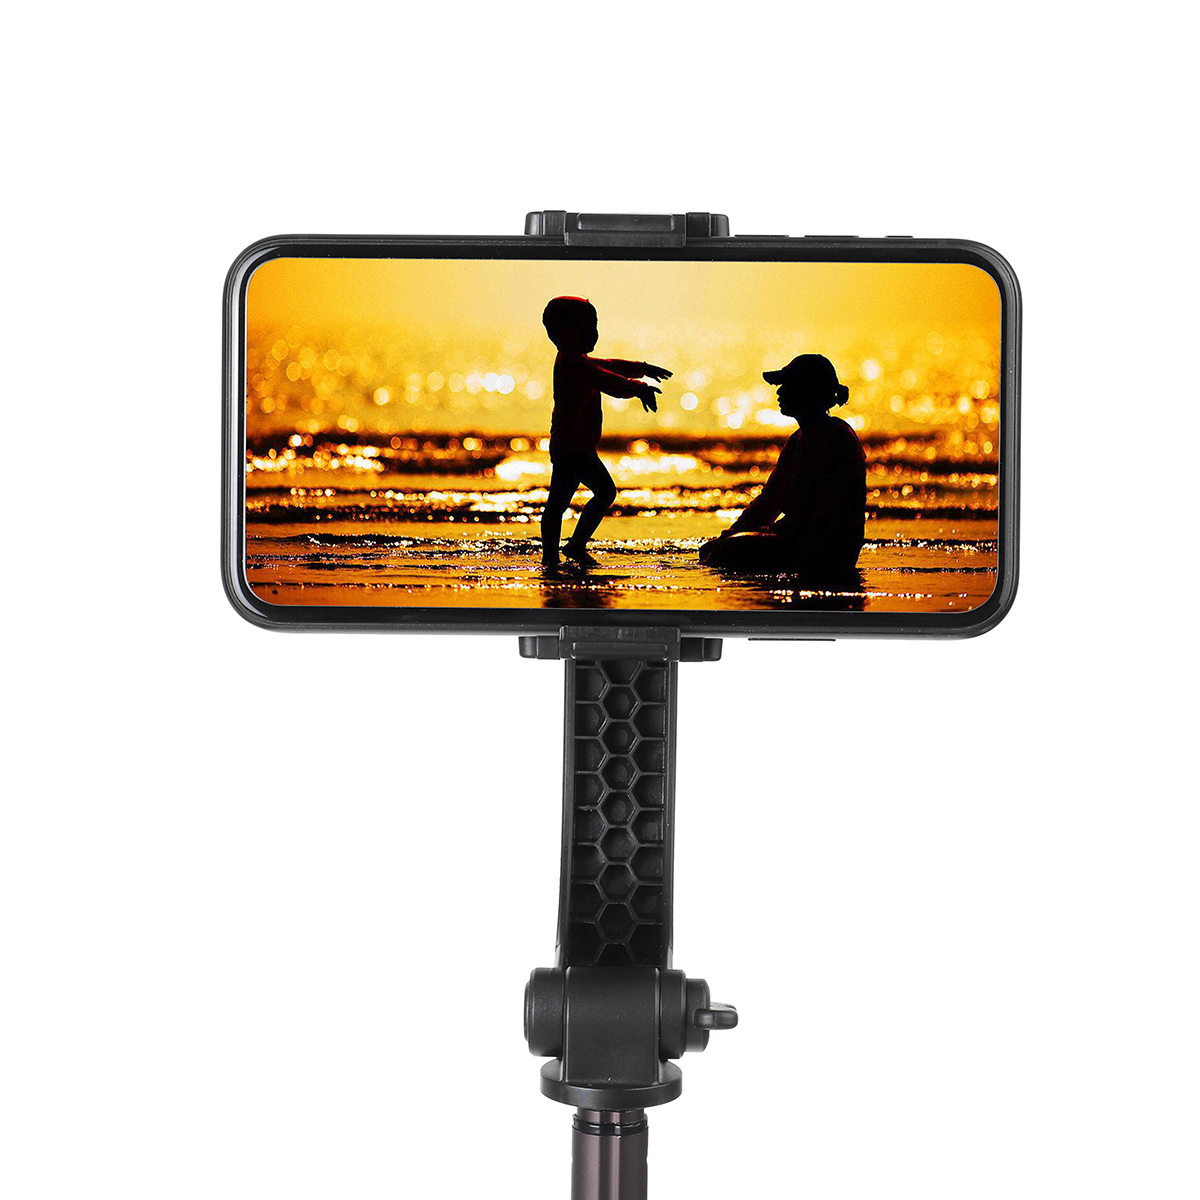 R15-Extended-Telescopic-bluetooth-Wireless-Handheld-Stabilizer-Mobile-Phone-Holder-Stand-for-Outdoor-1822120-9